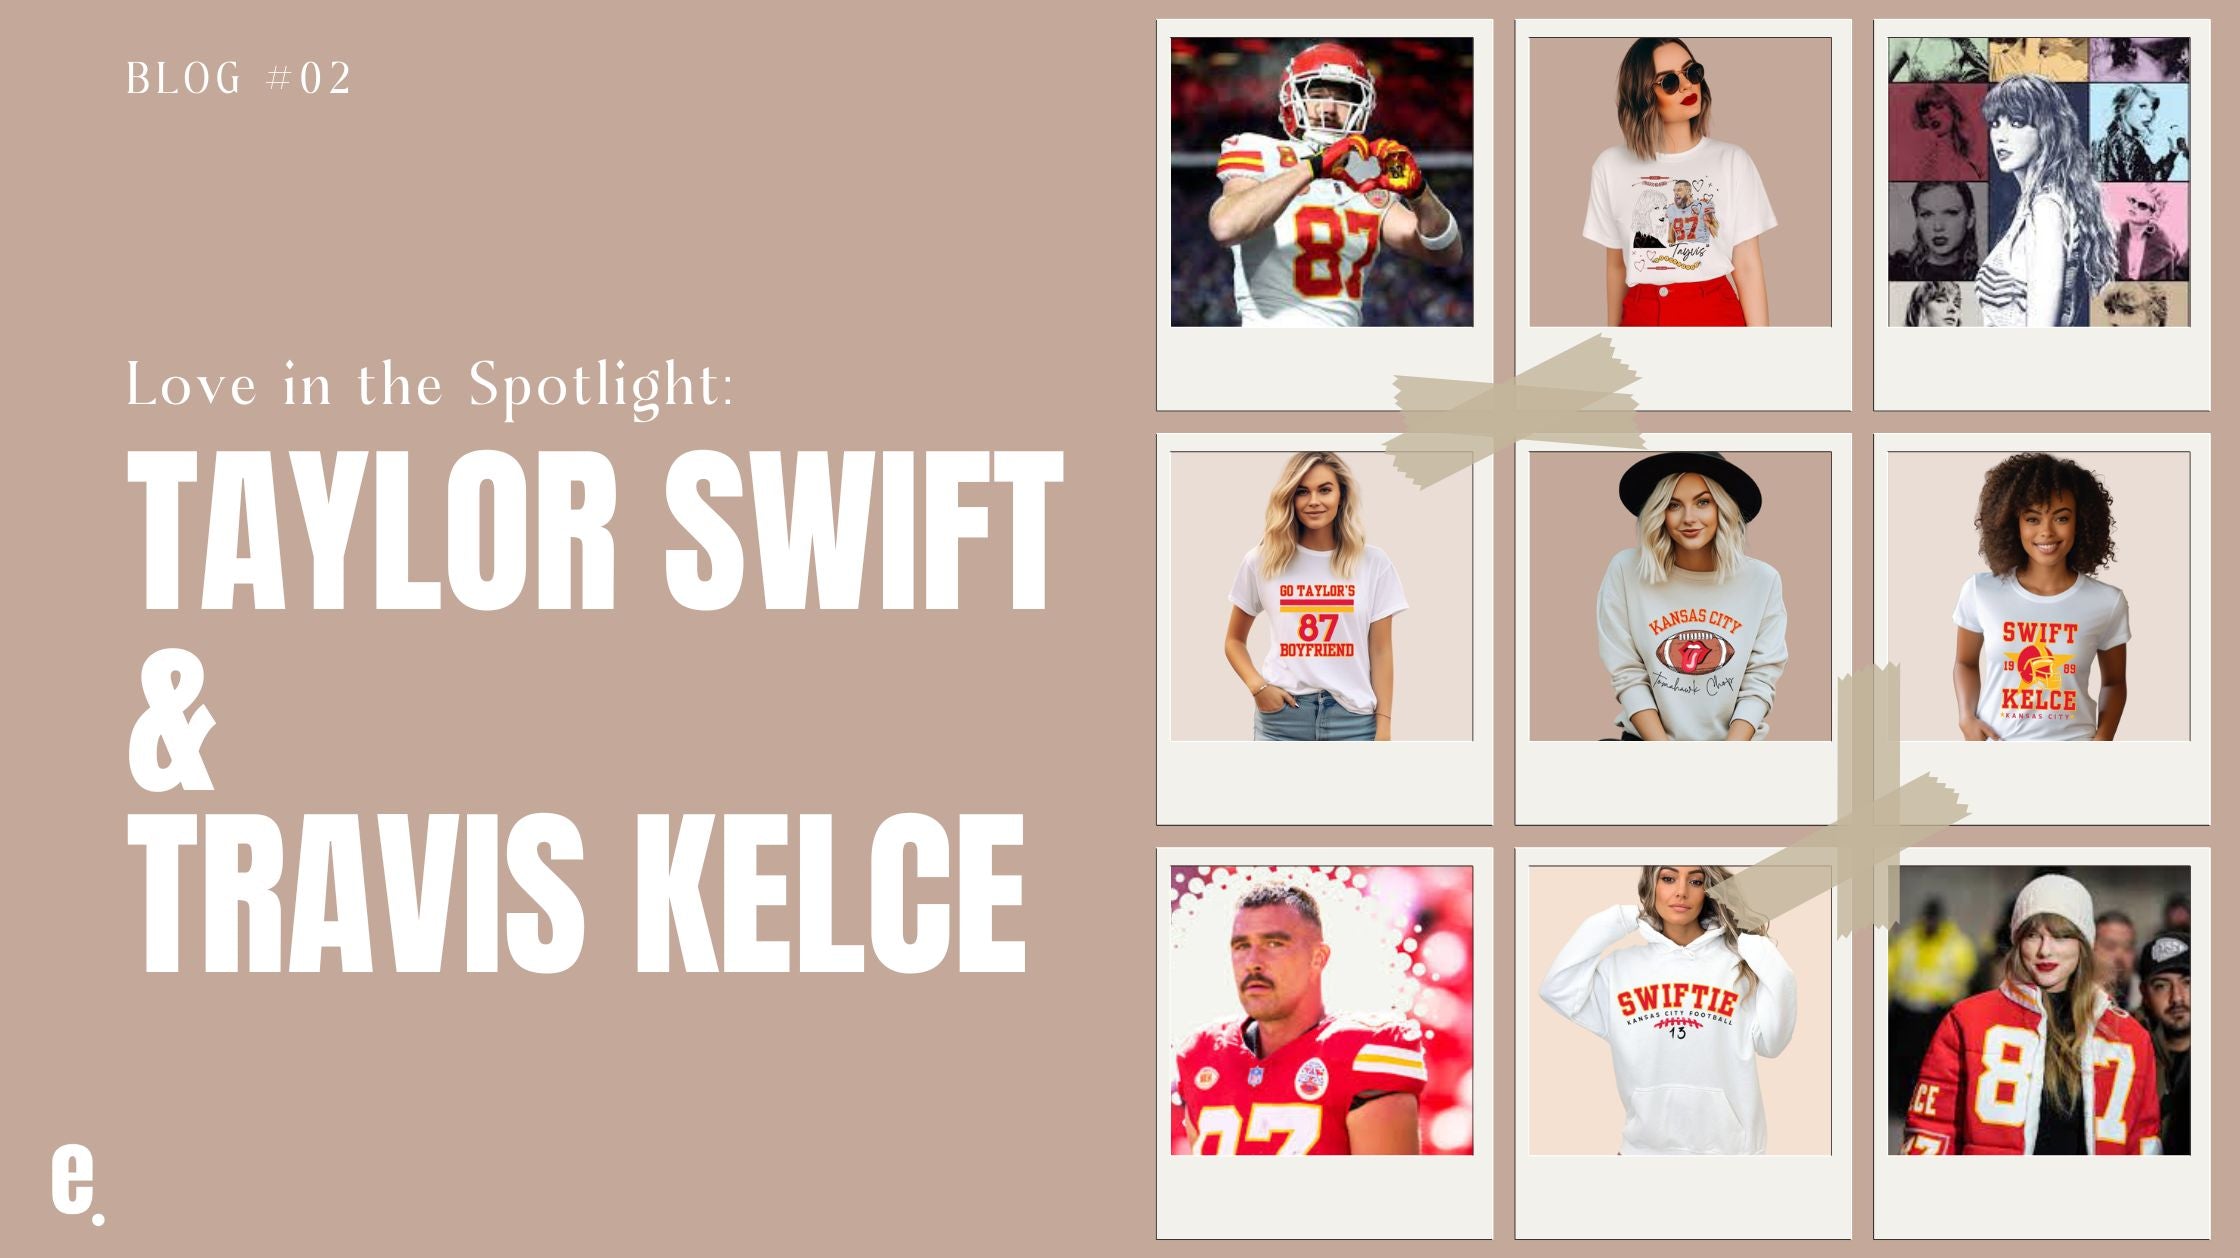 Love in the Spotlight: The Taylor Swift and Travis Kelce Love Story